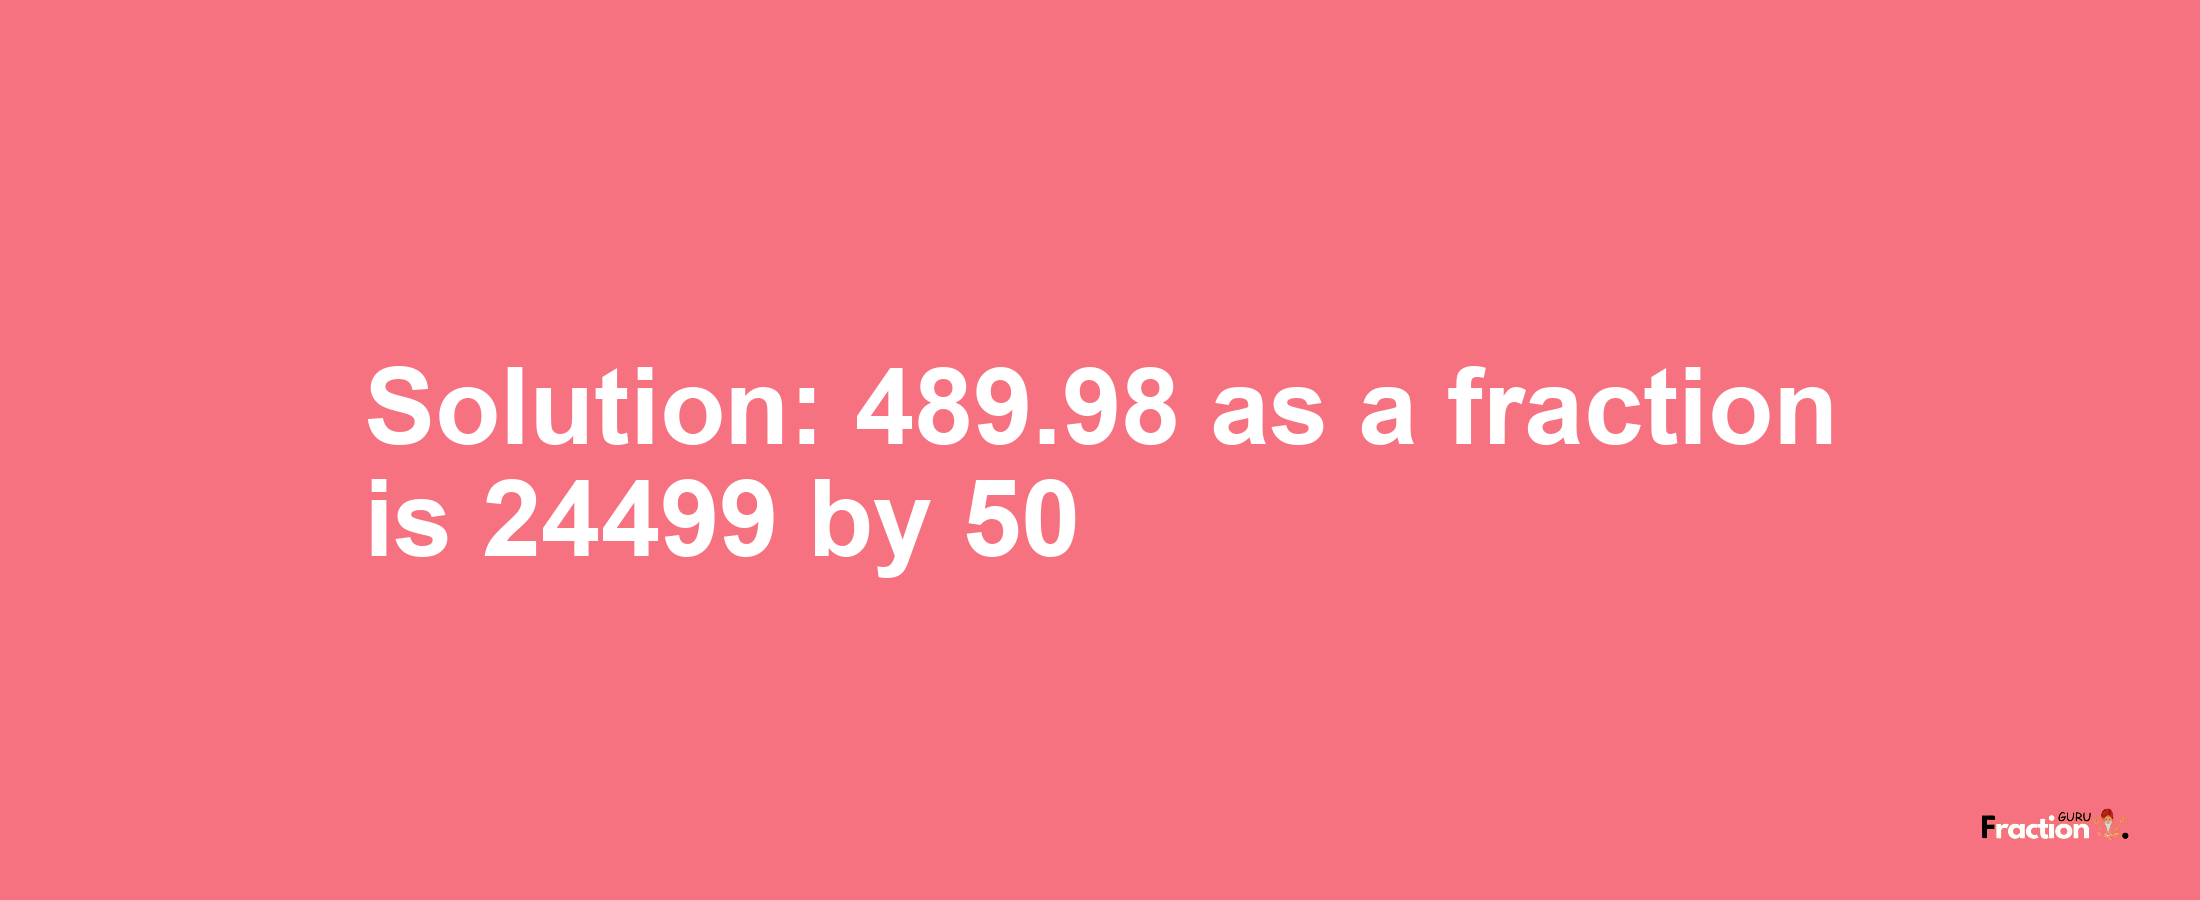 Solution:489.98 as a fraction is 24499/50